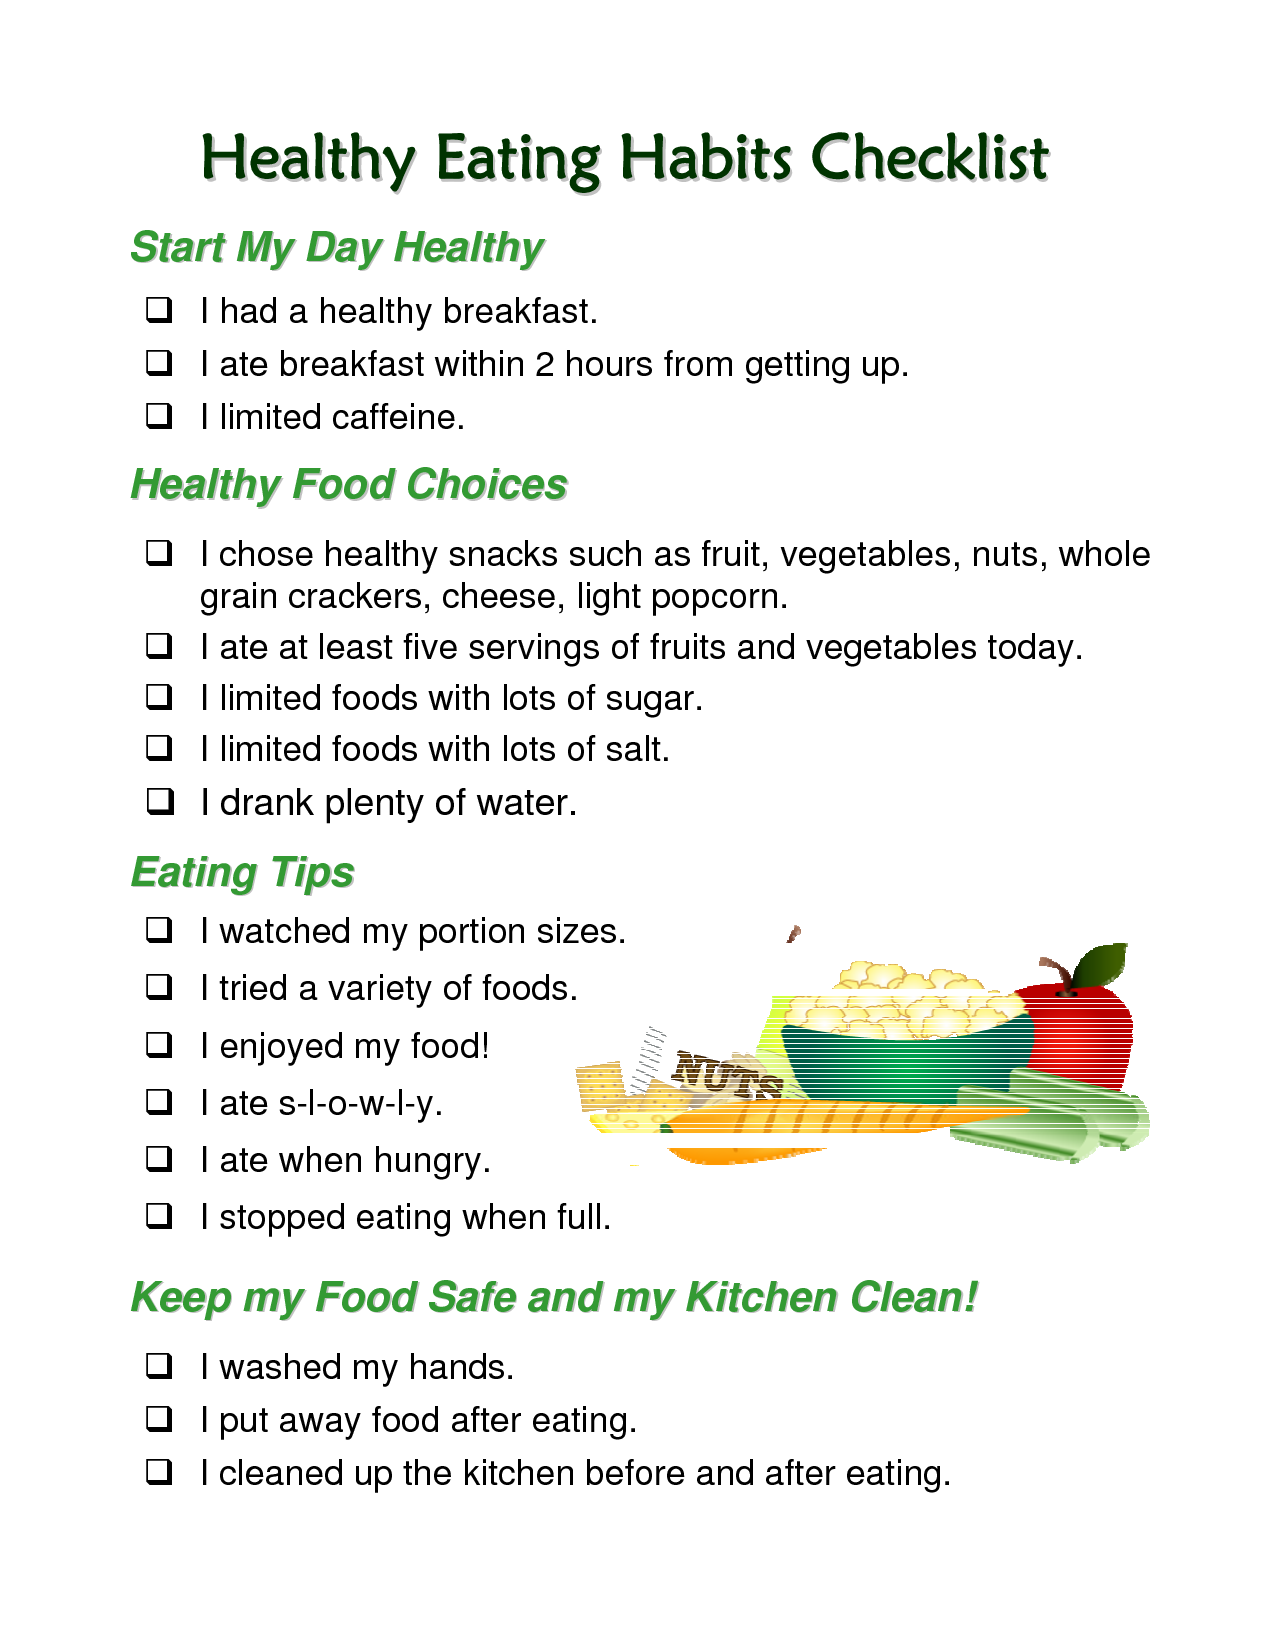 Healthy Food Habits About Healthy Food Pyramid Recipes For Kids Plate    